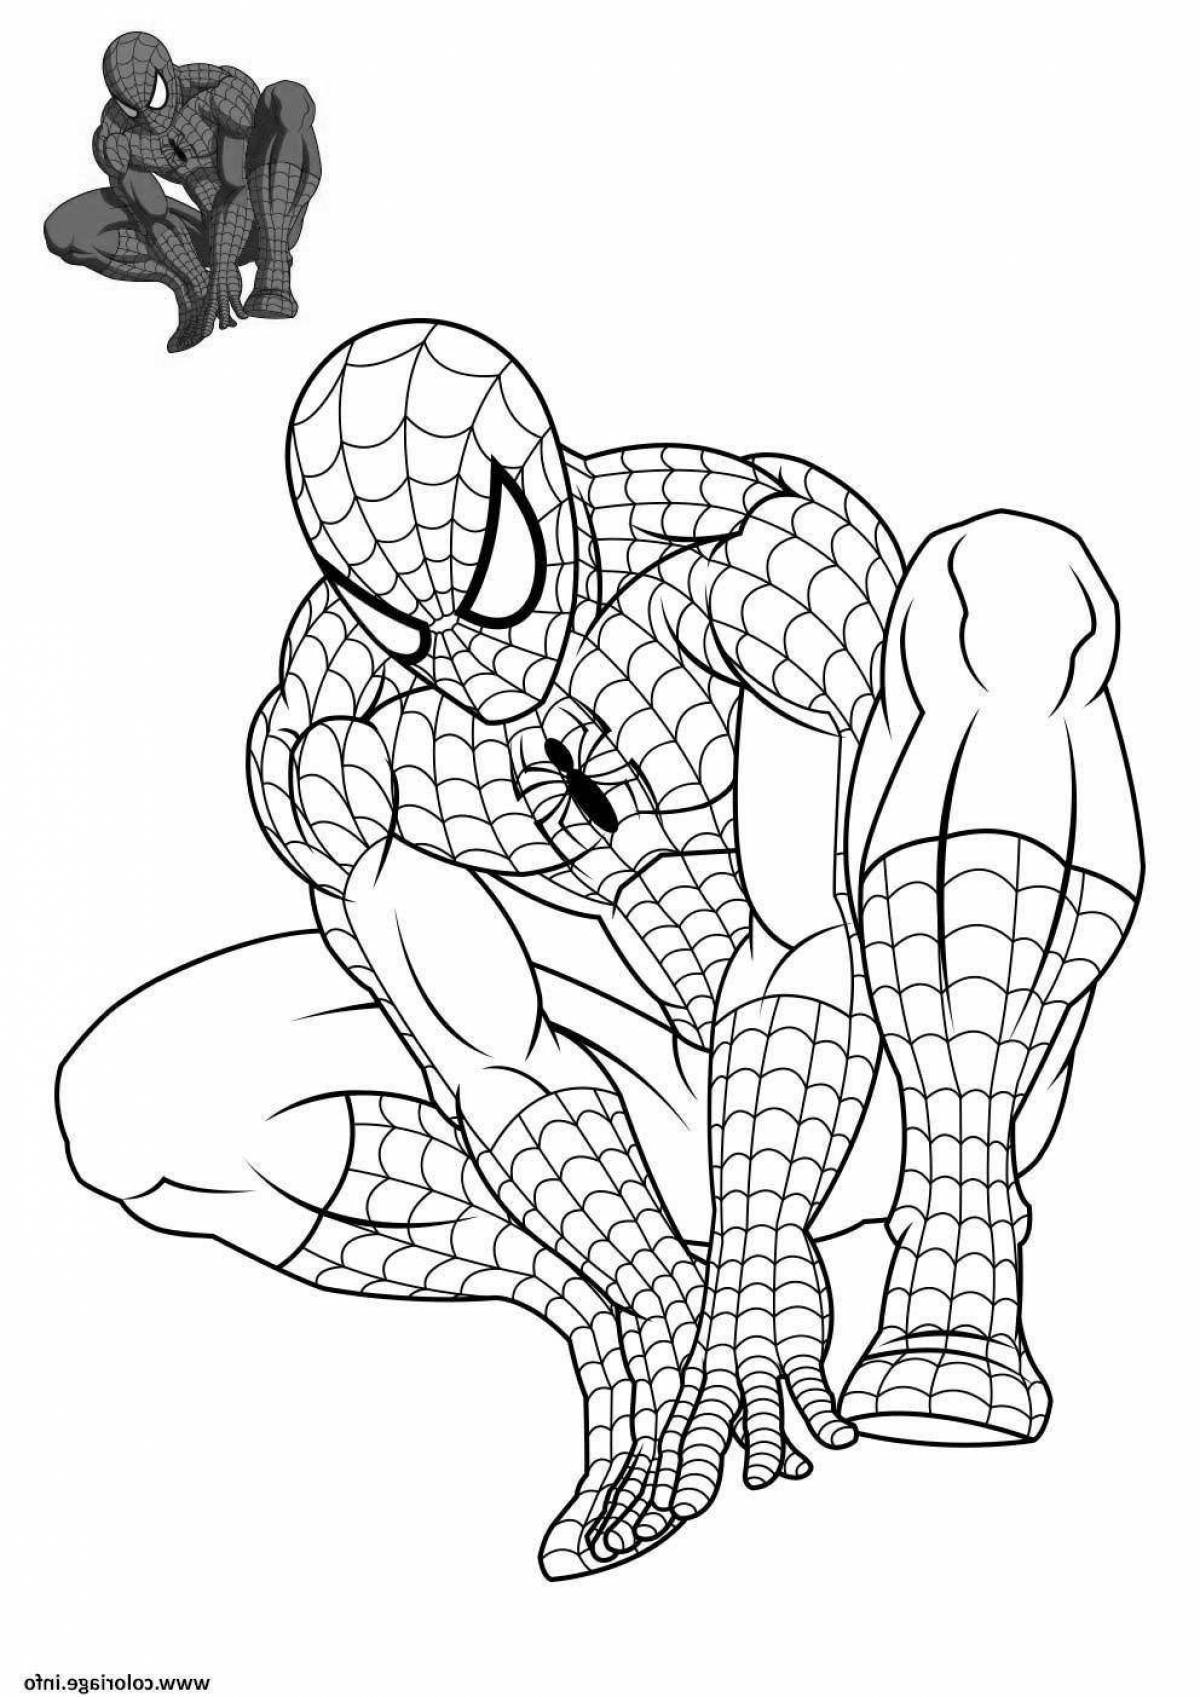 Coloring page fascinating team of spiderman